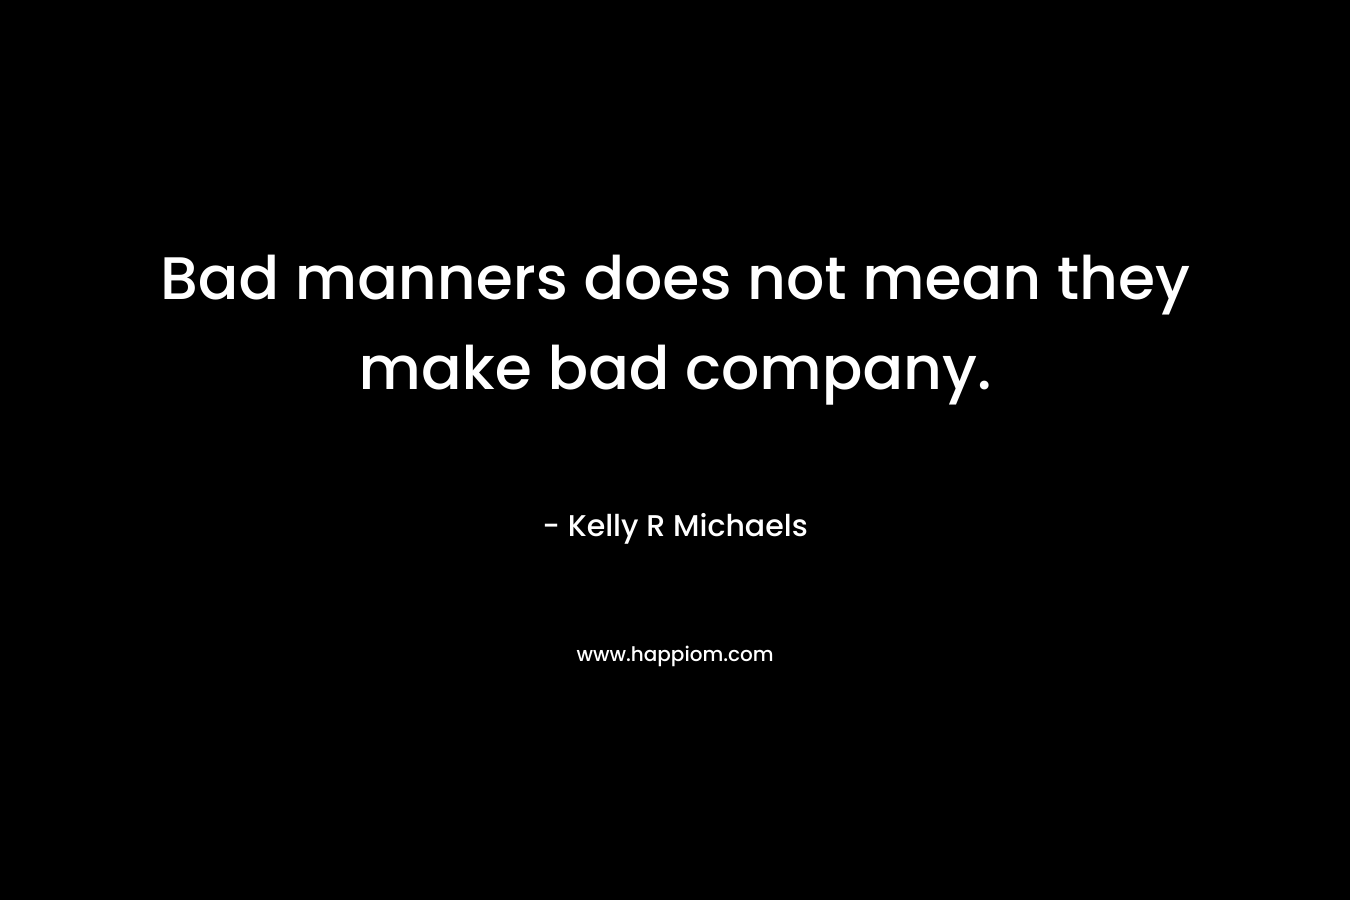 Bad manners does not mean they make bad company.